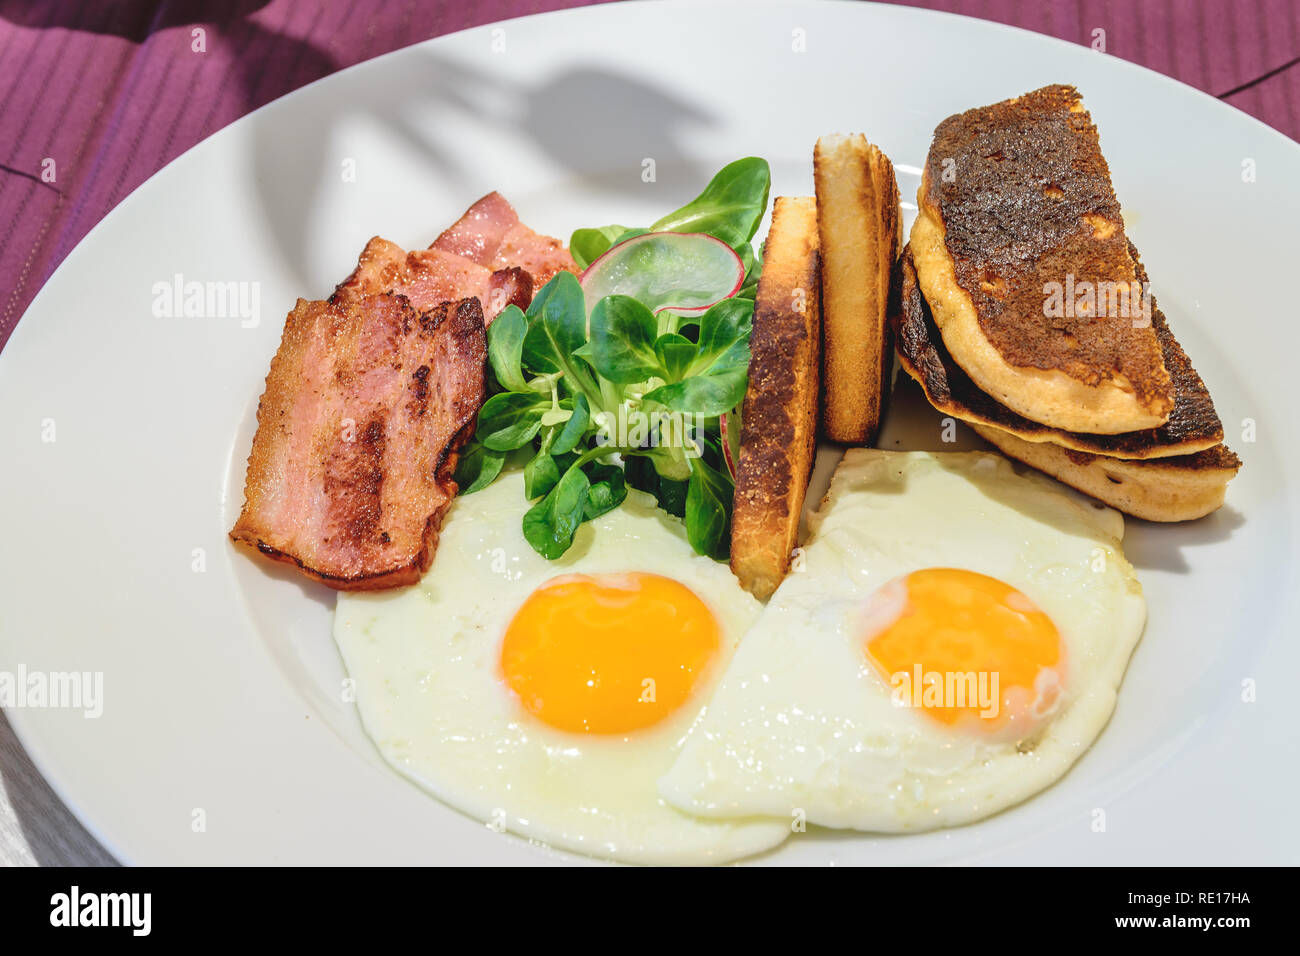 American breakfast with sunny side up eggs, bacon and french toast, close up photo. Stock Photo